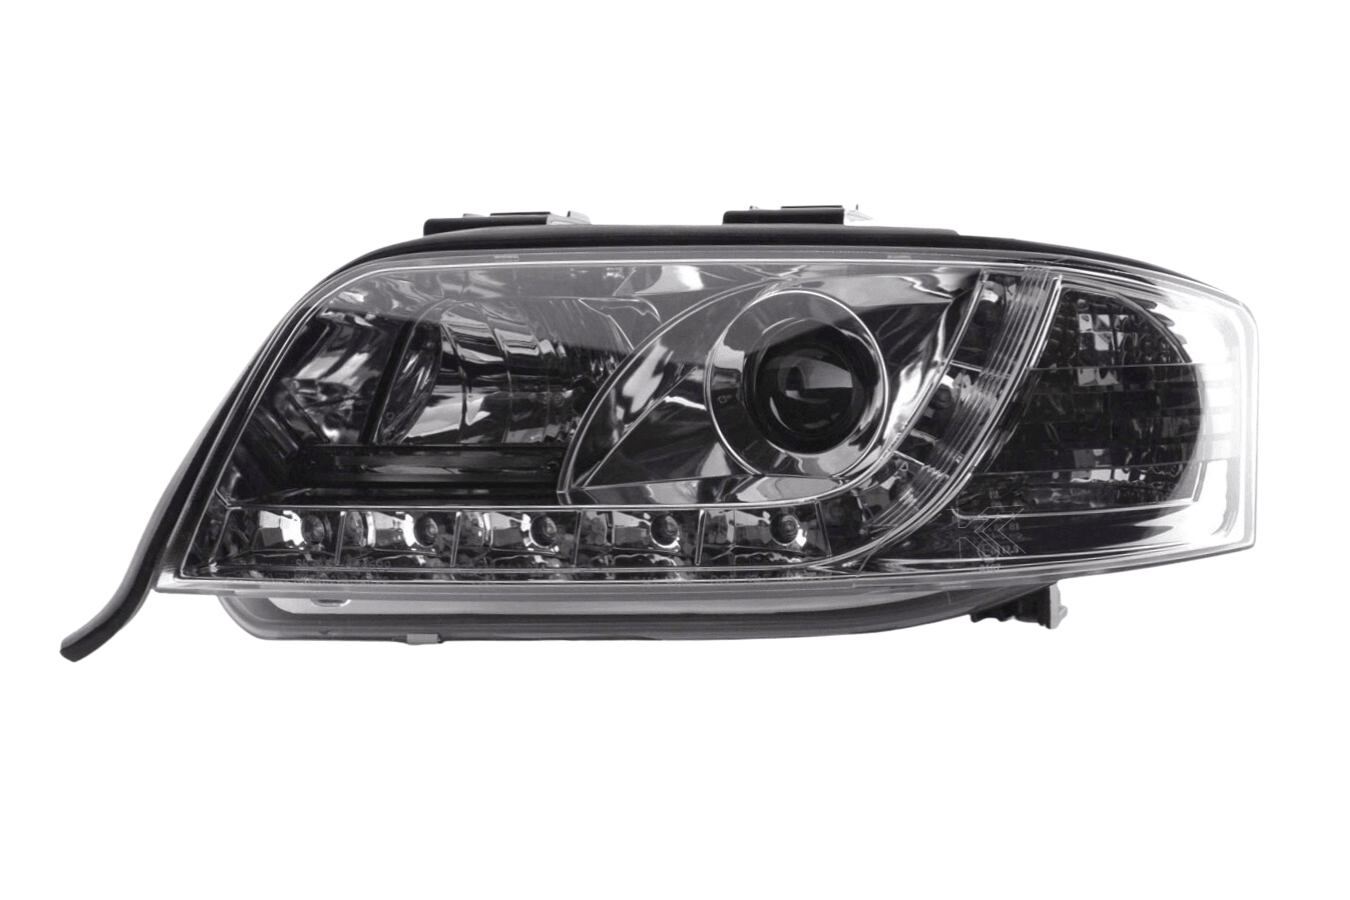 Audi A6 (C5 4B) Chrome LED Headlights with Daytime Running Lights (2001-2004) - K2 Industries